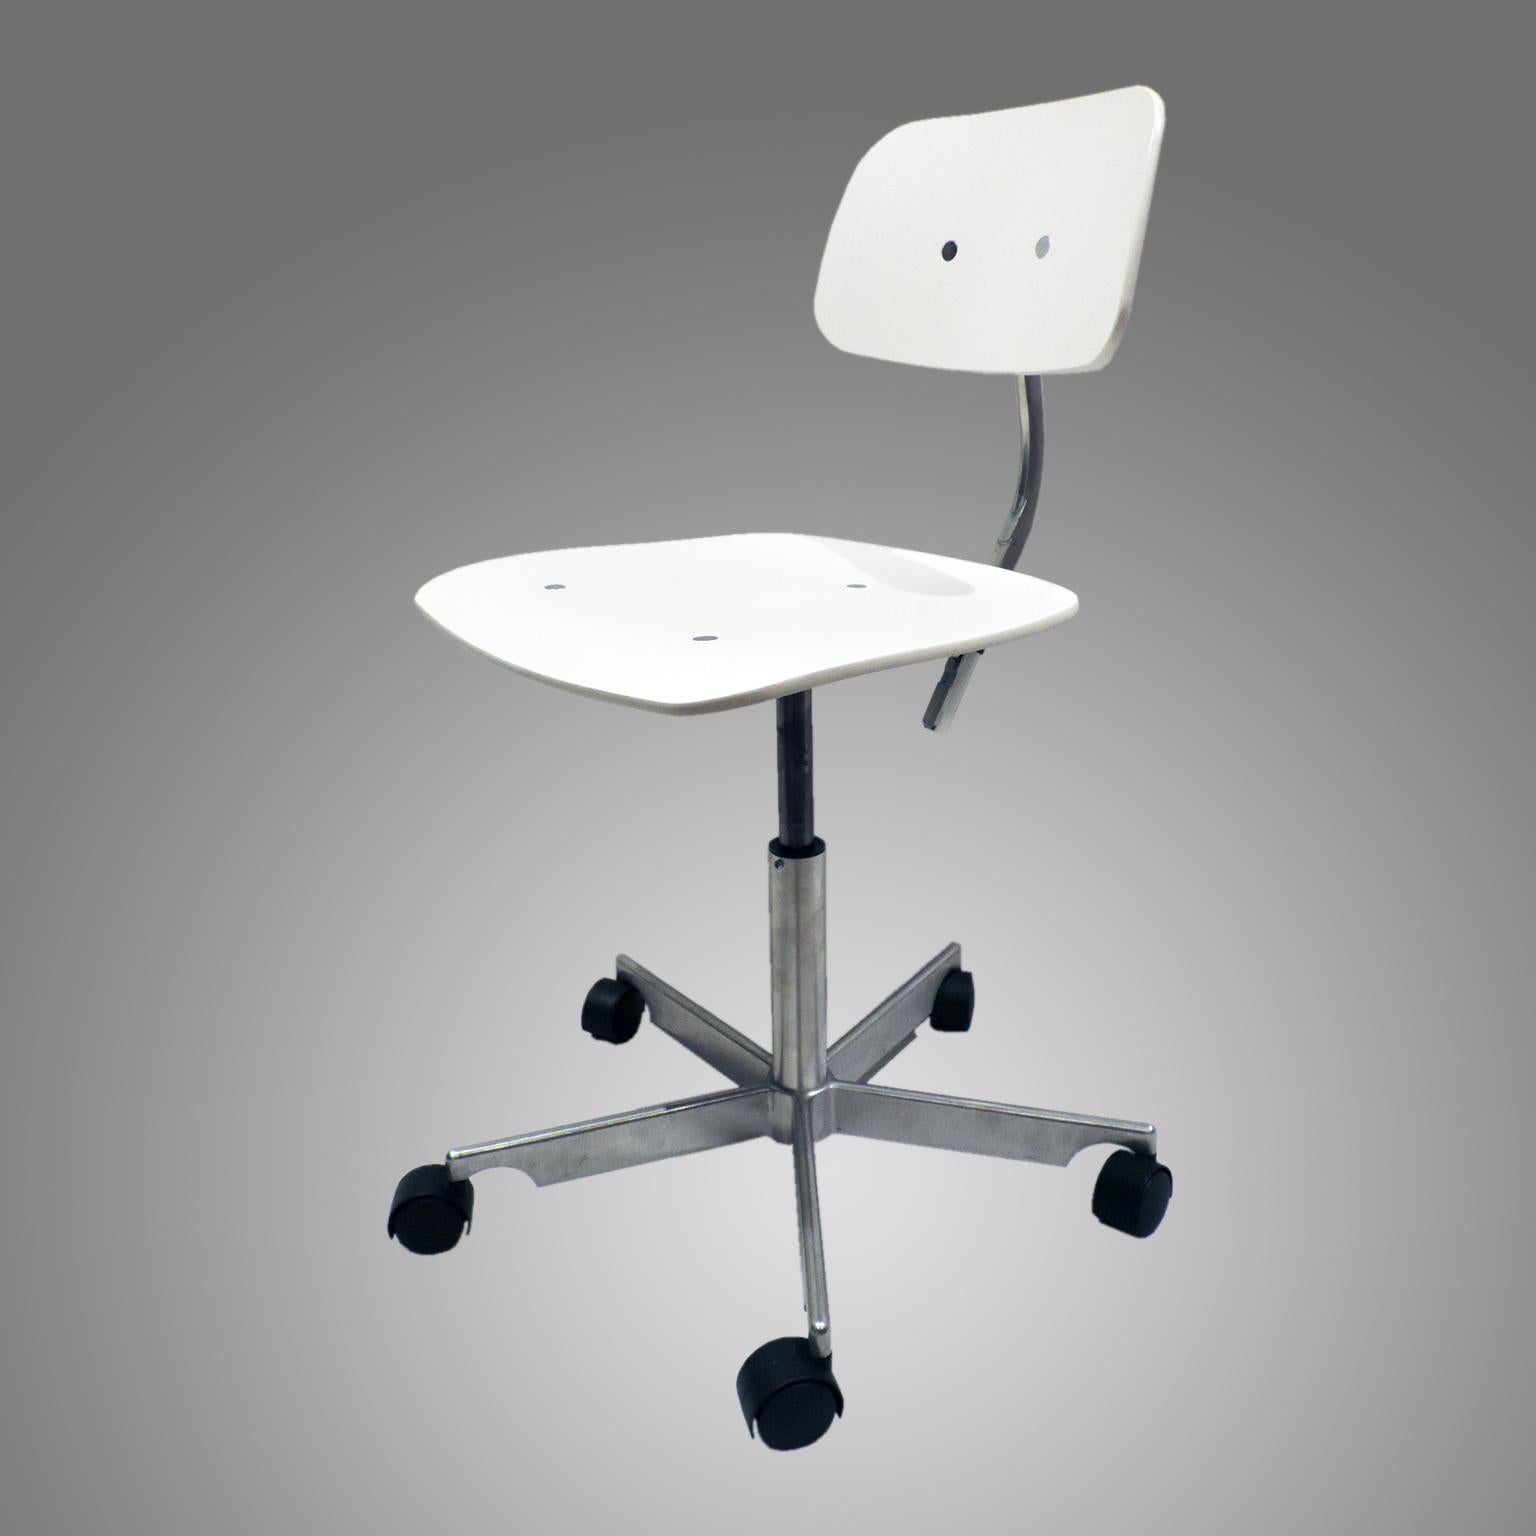 Kevi is the classic office chair with the hardwearing principle: the better you sit, the more you get done. It is suitable for homes, offices, schools and workplaces where one solution must satisfy many demands.

The seat and back are made of